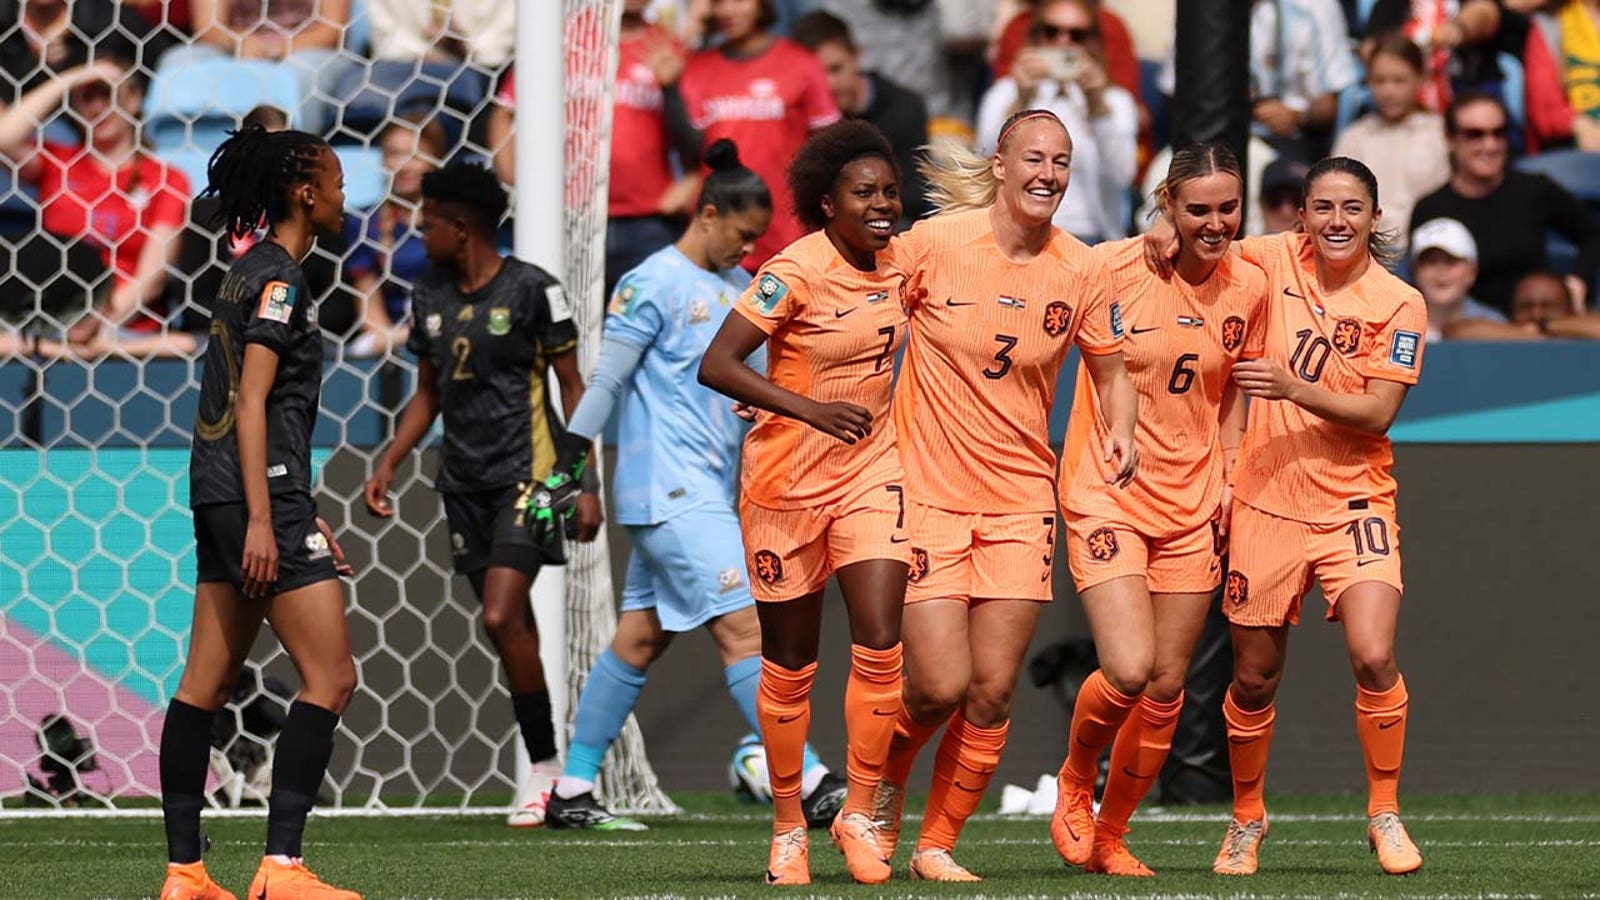 Netherlands' Jill Roord scores goal vs. South Africa in 9'